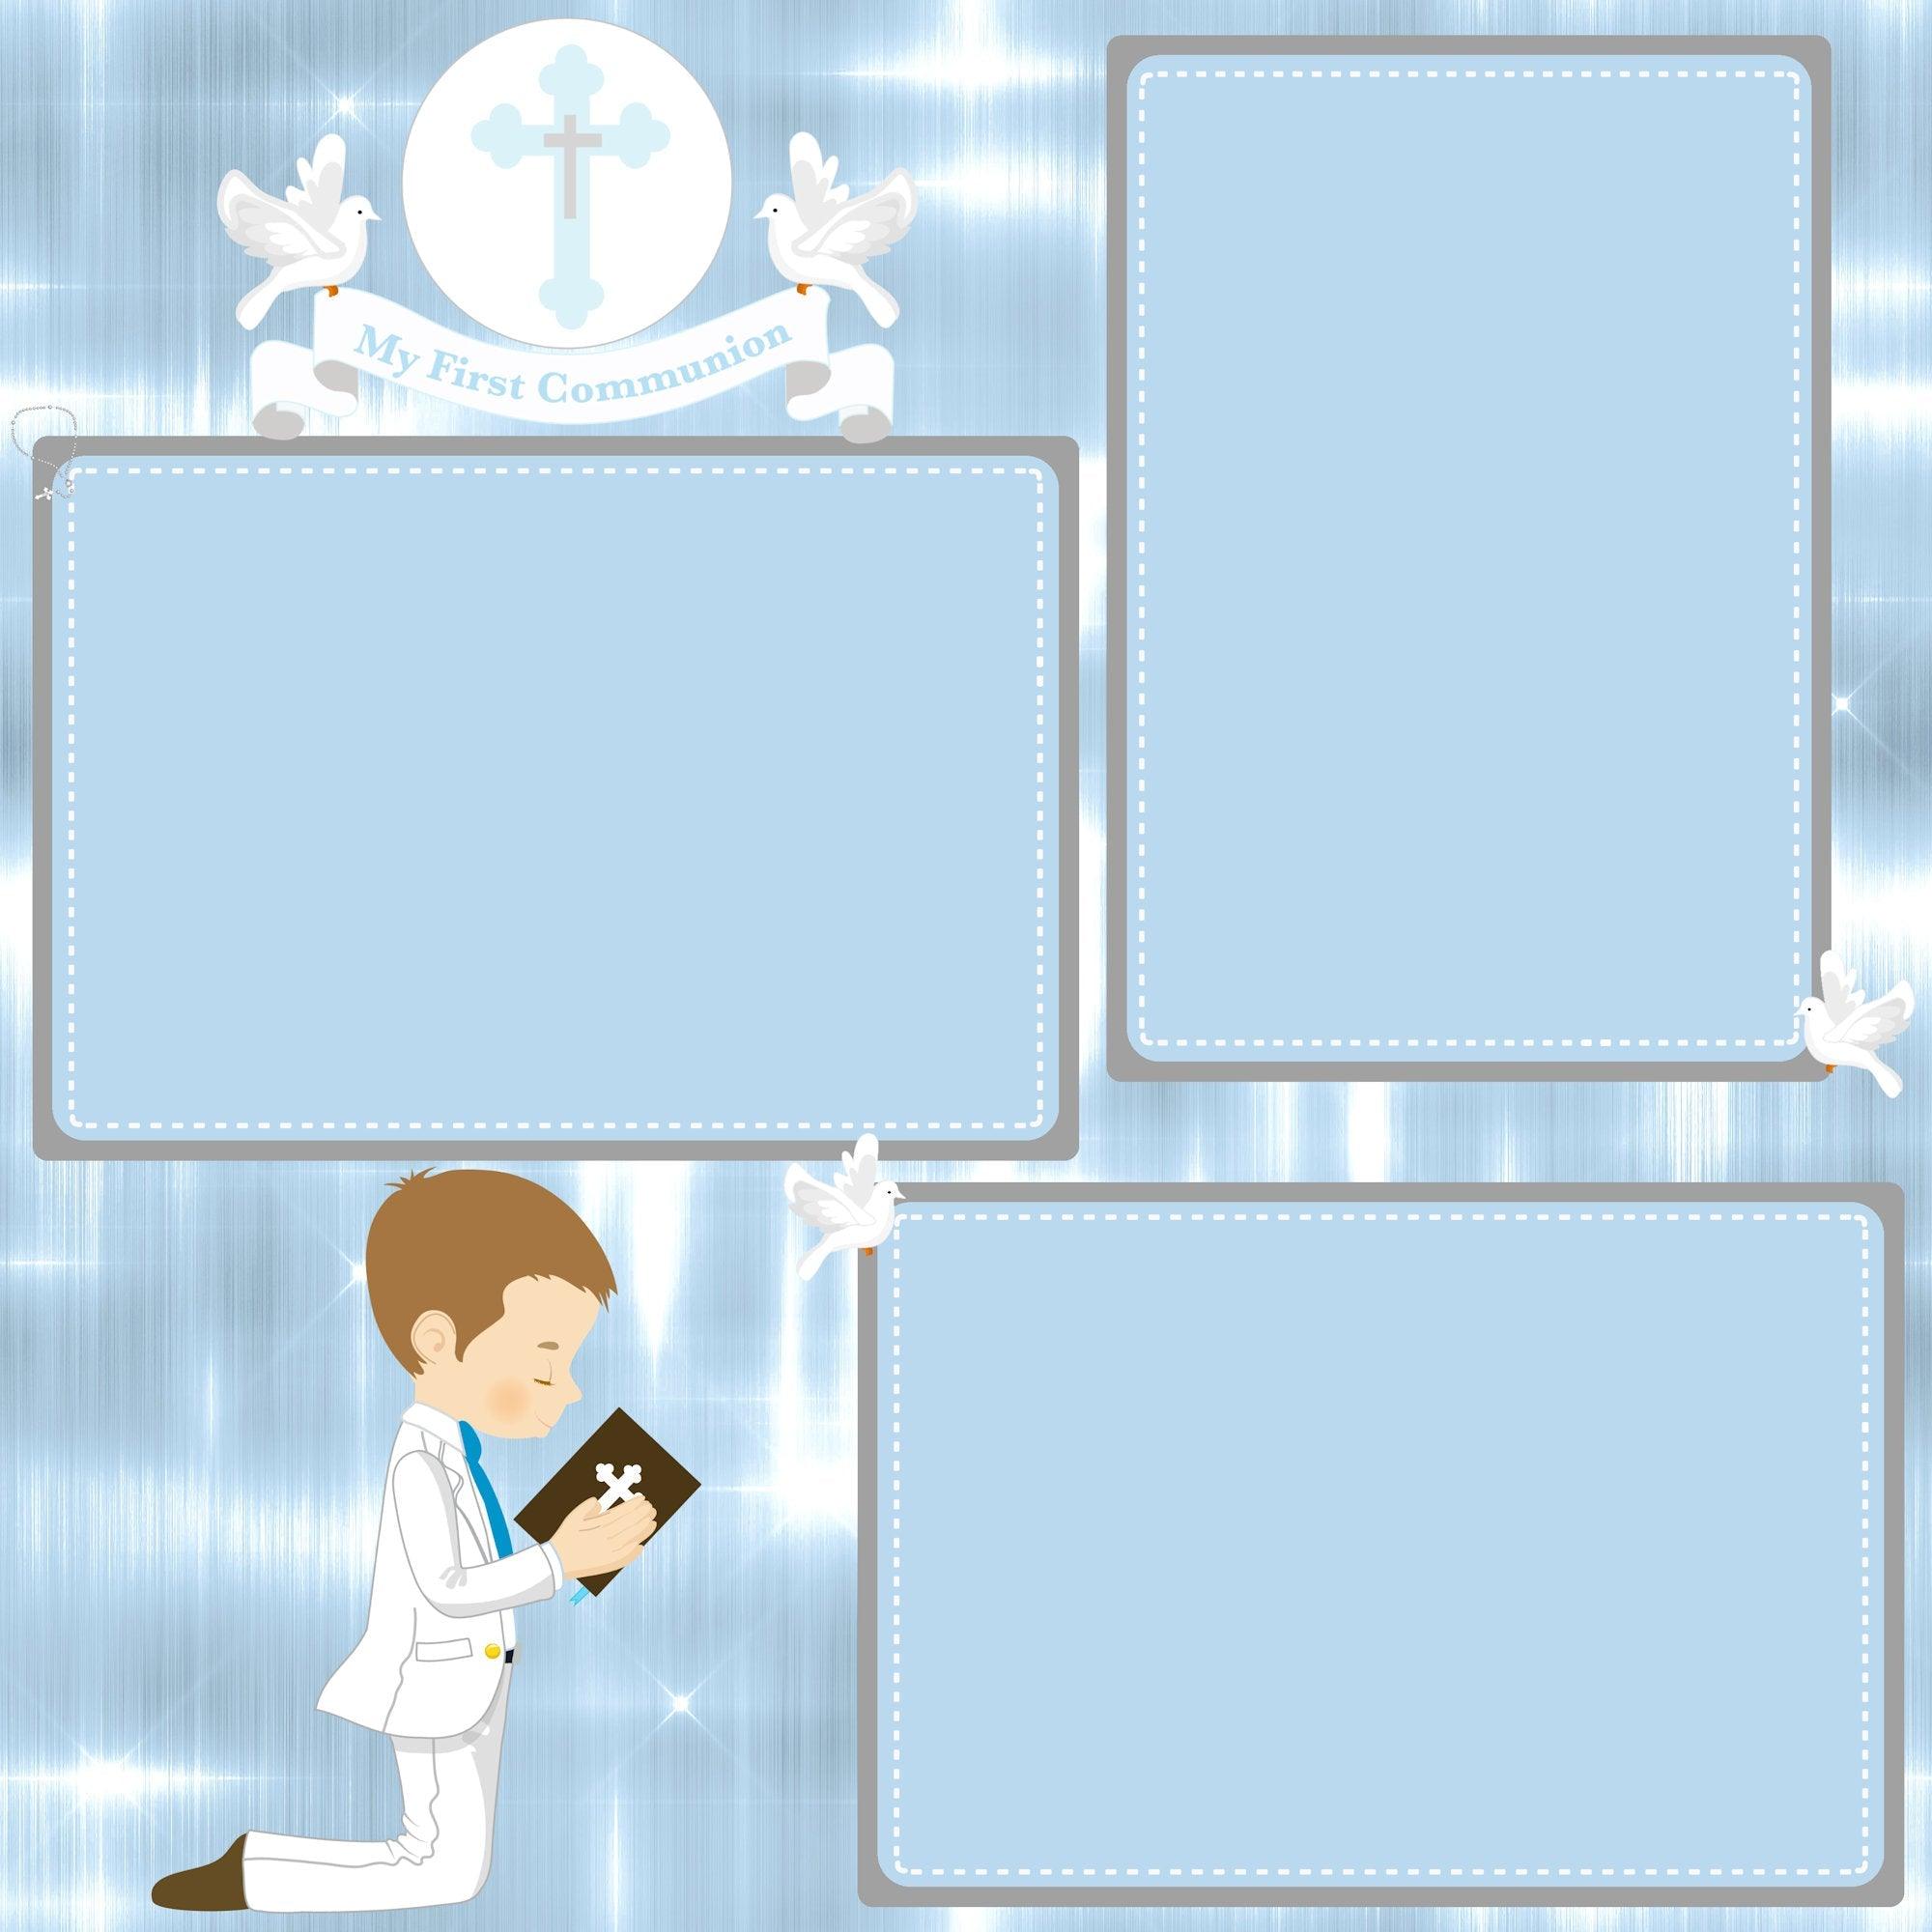 First Communion Boy (2) - 12 x 12 Premade, Printed Scrapbook Pages by SSC Designs - Scrapbook Supply Companies